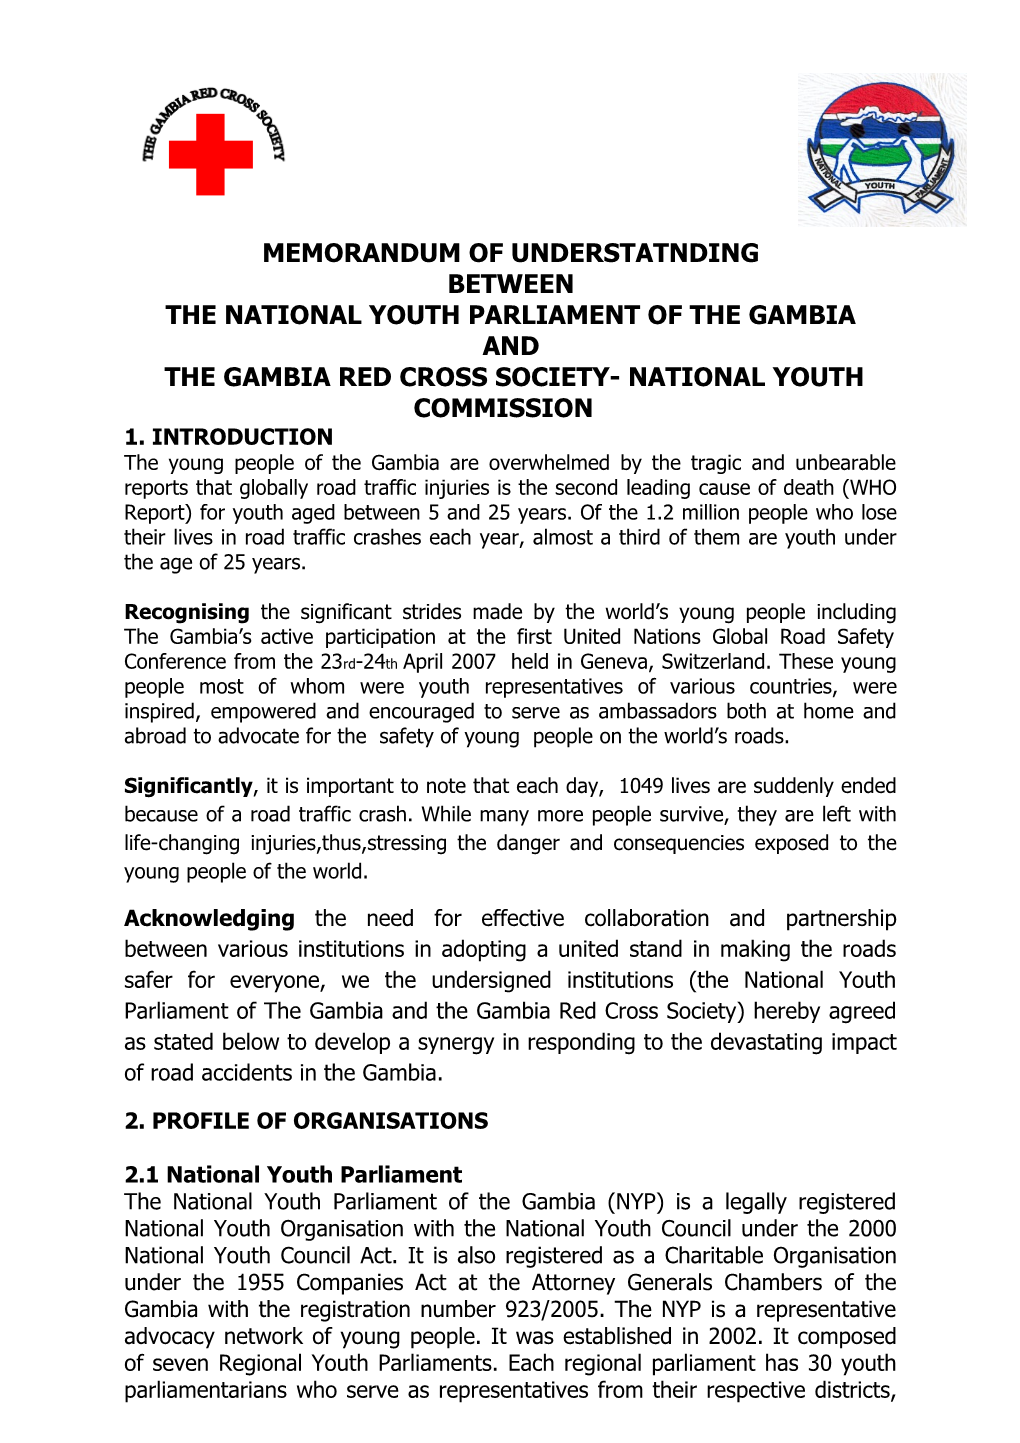 The National Youth Parliament of the Gambia